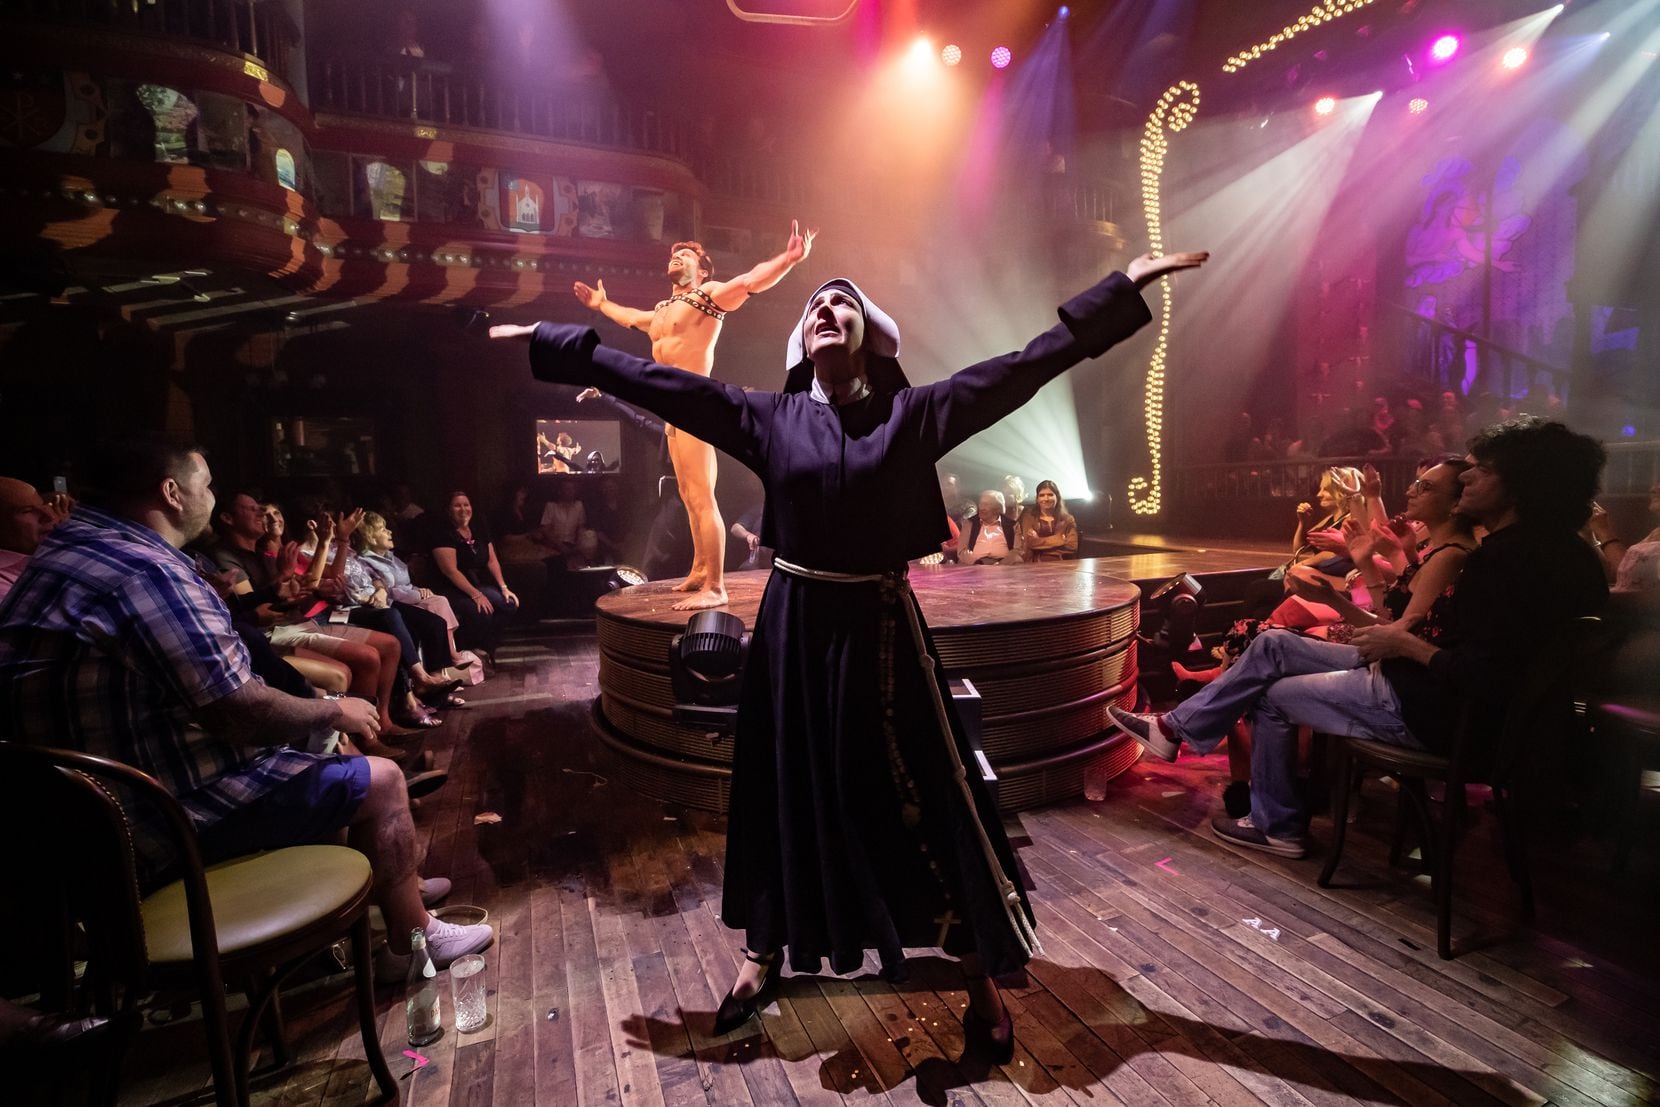 "Atomic Saloon Show," set in a fictitious Wild West town near an atomic test site, is a brilliant blend of comedy, acrobats, vaudeville and burlesque.